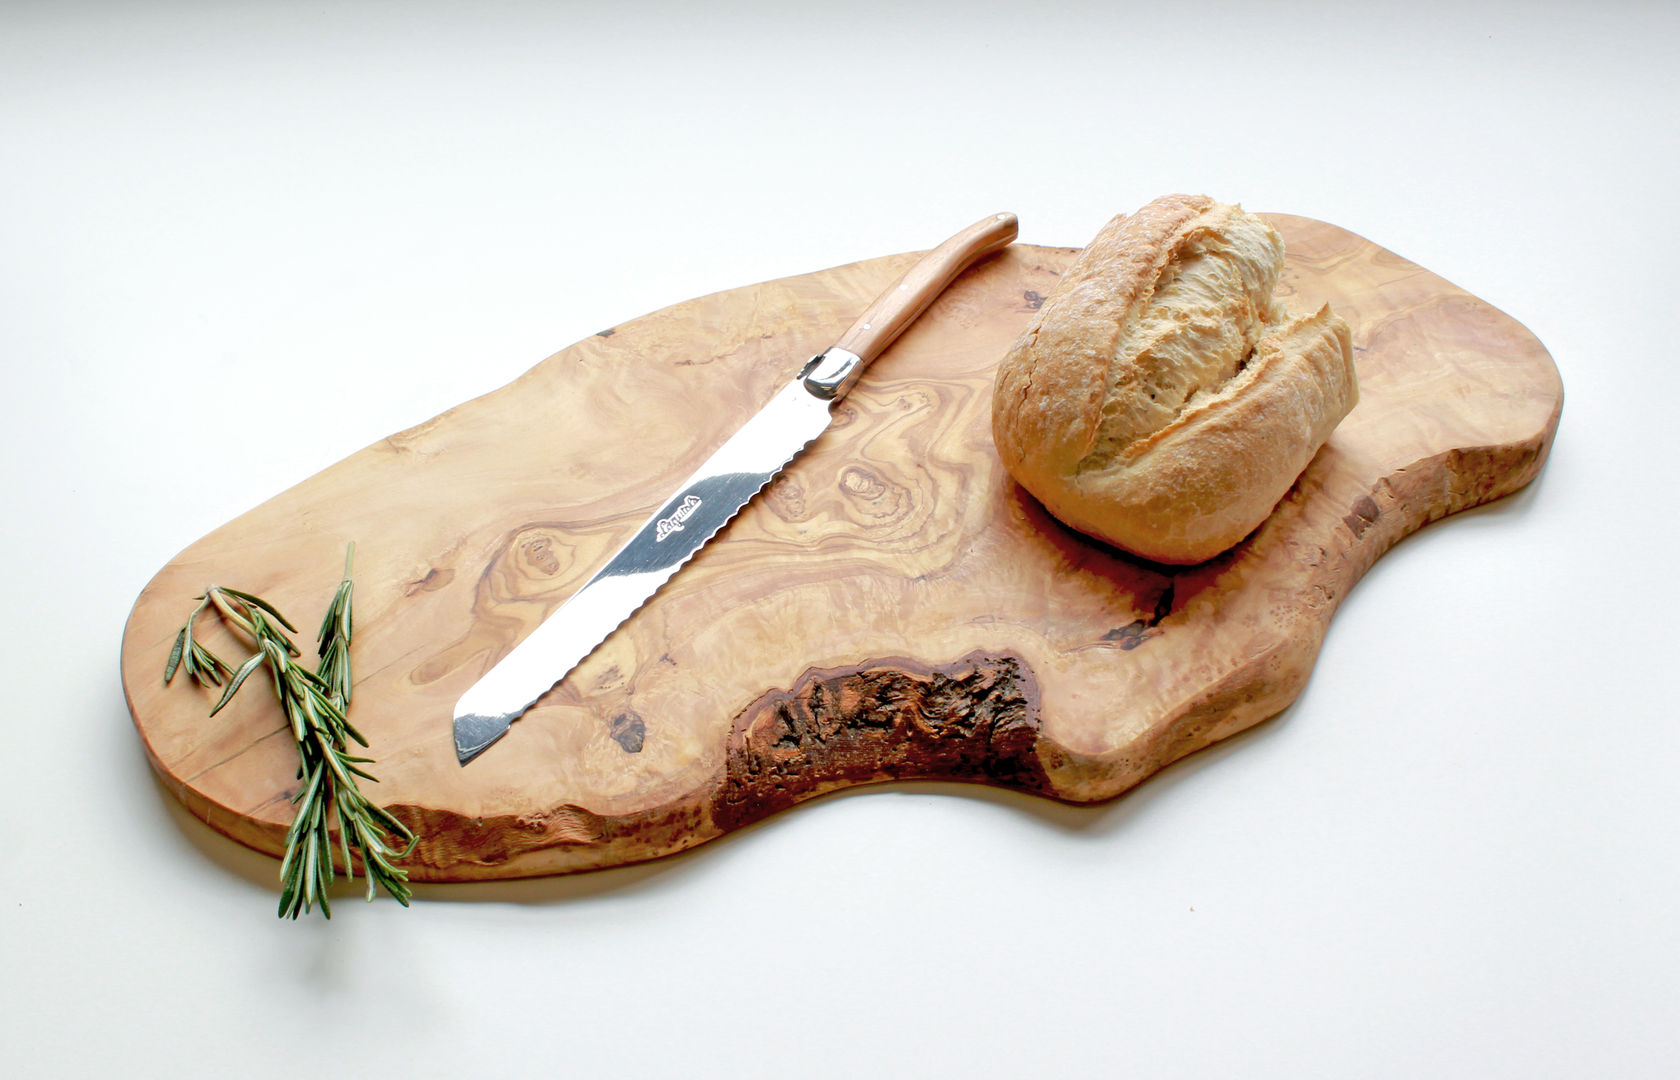 Large Rustic Olive Wood Serving Board, The Rustic Dish The Rustic Dish مطبخ أواني المطبخ